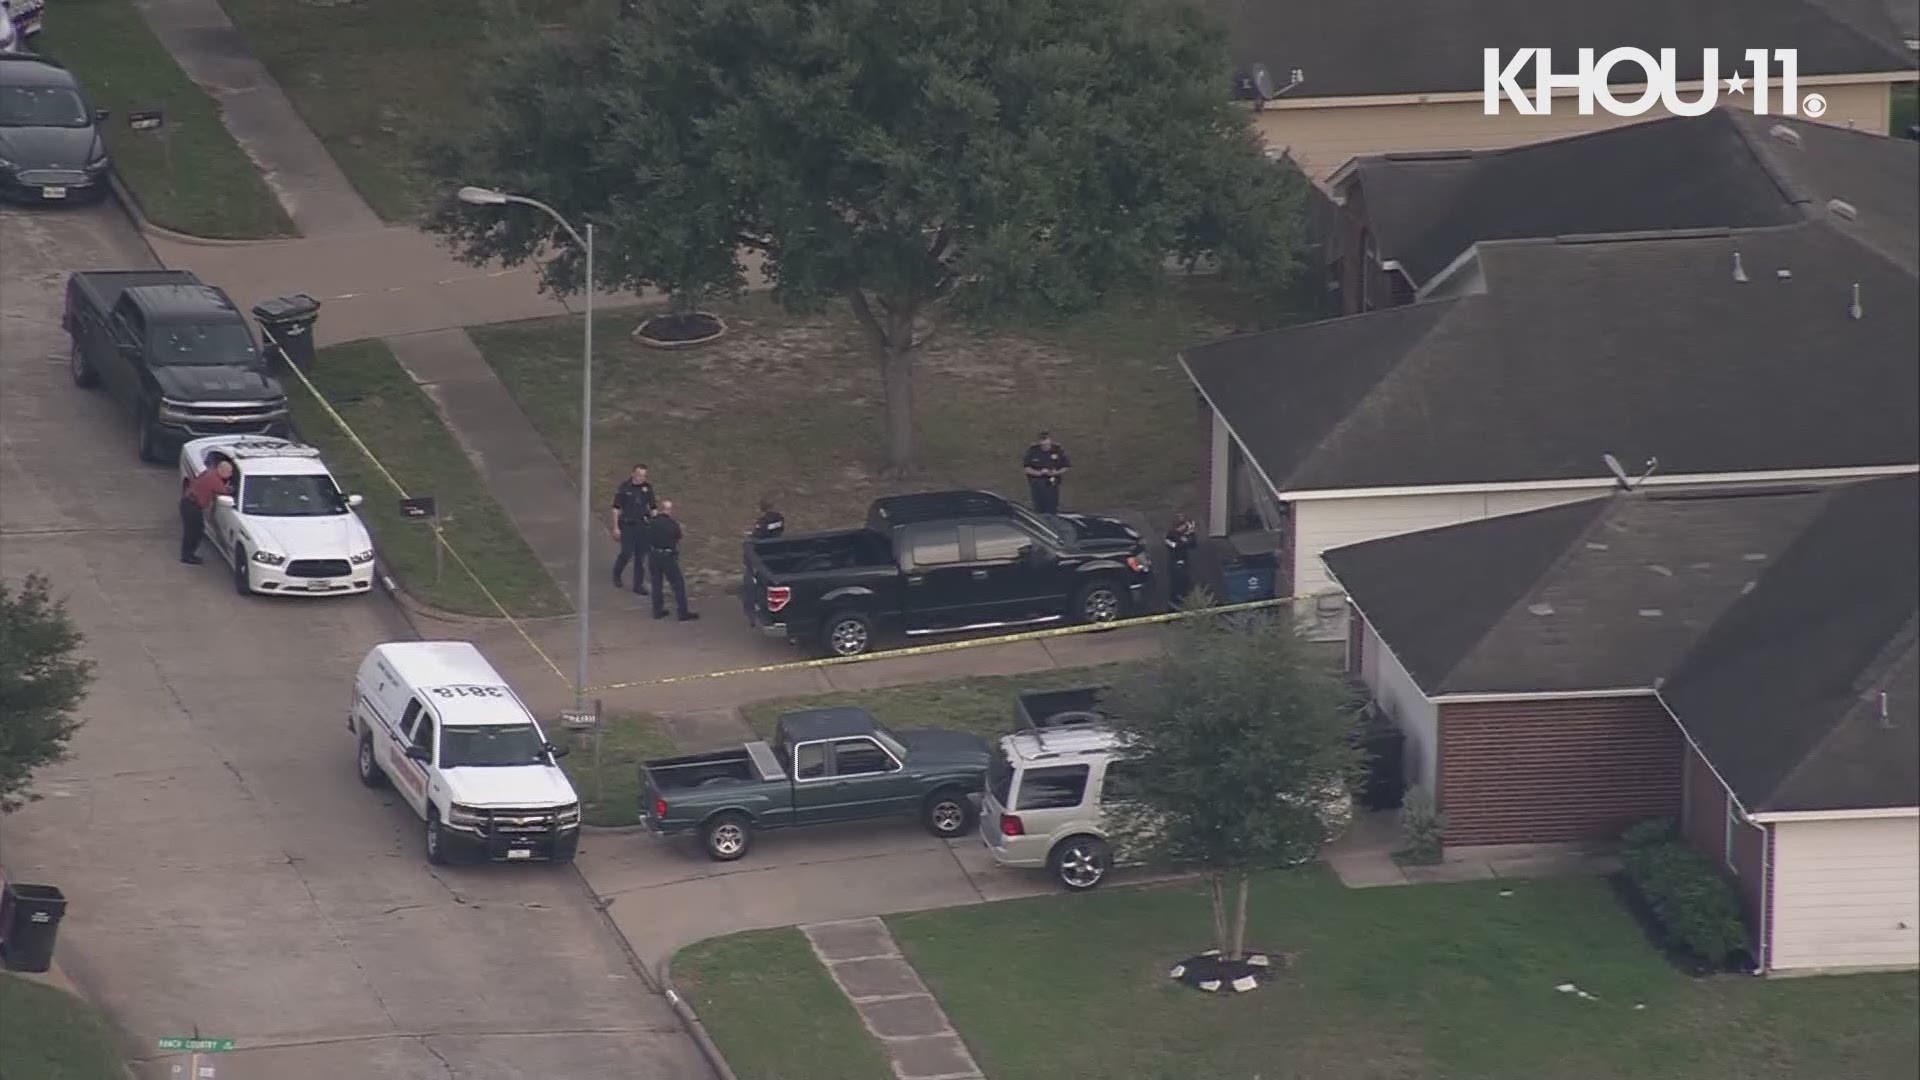 Two people were found dead Wednesday at a home in northwest Harris County.